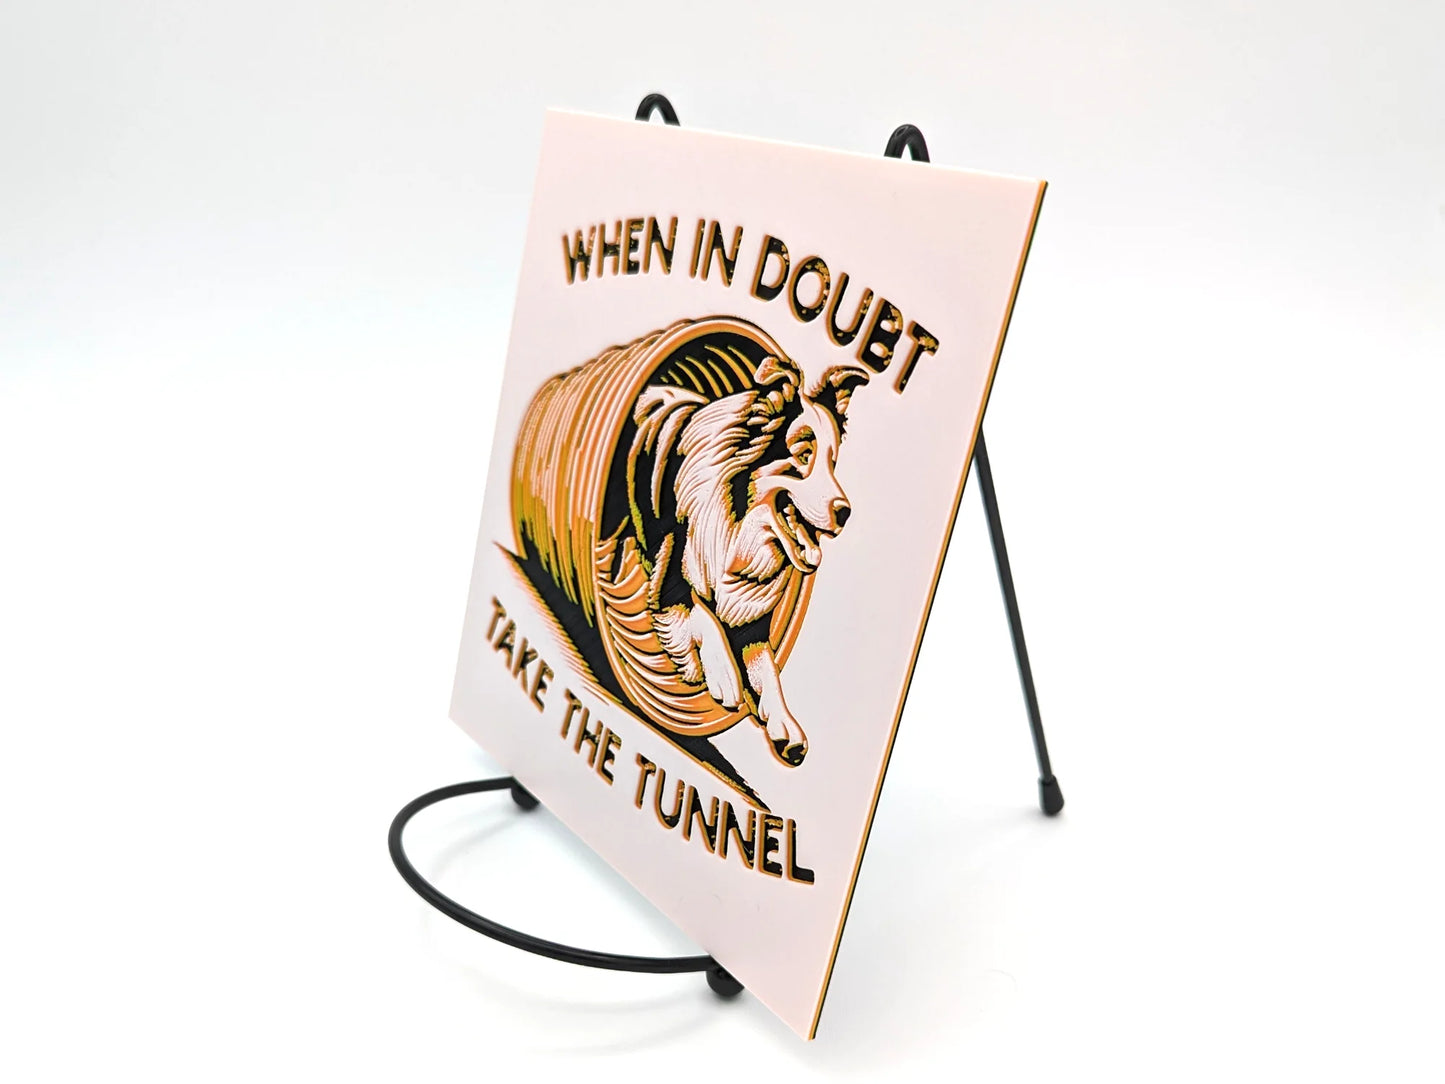 Funny Agility "Take the Tunnel" Desk or Wall Art